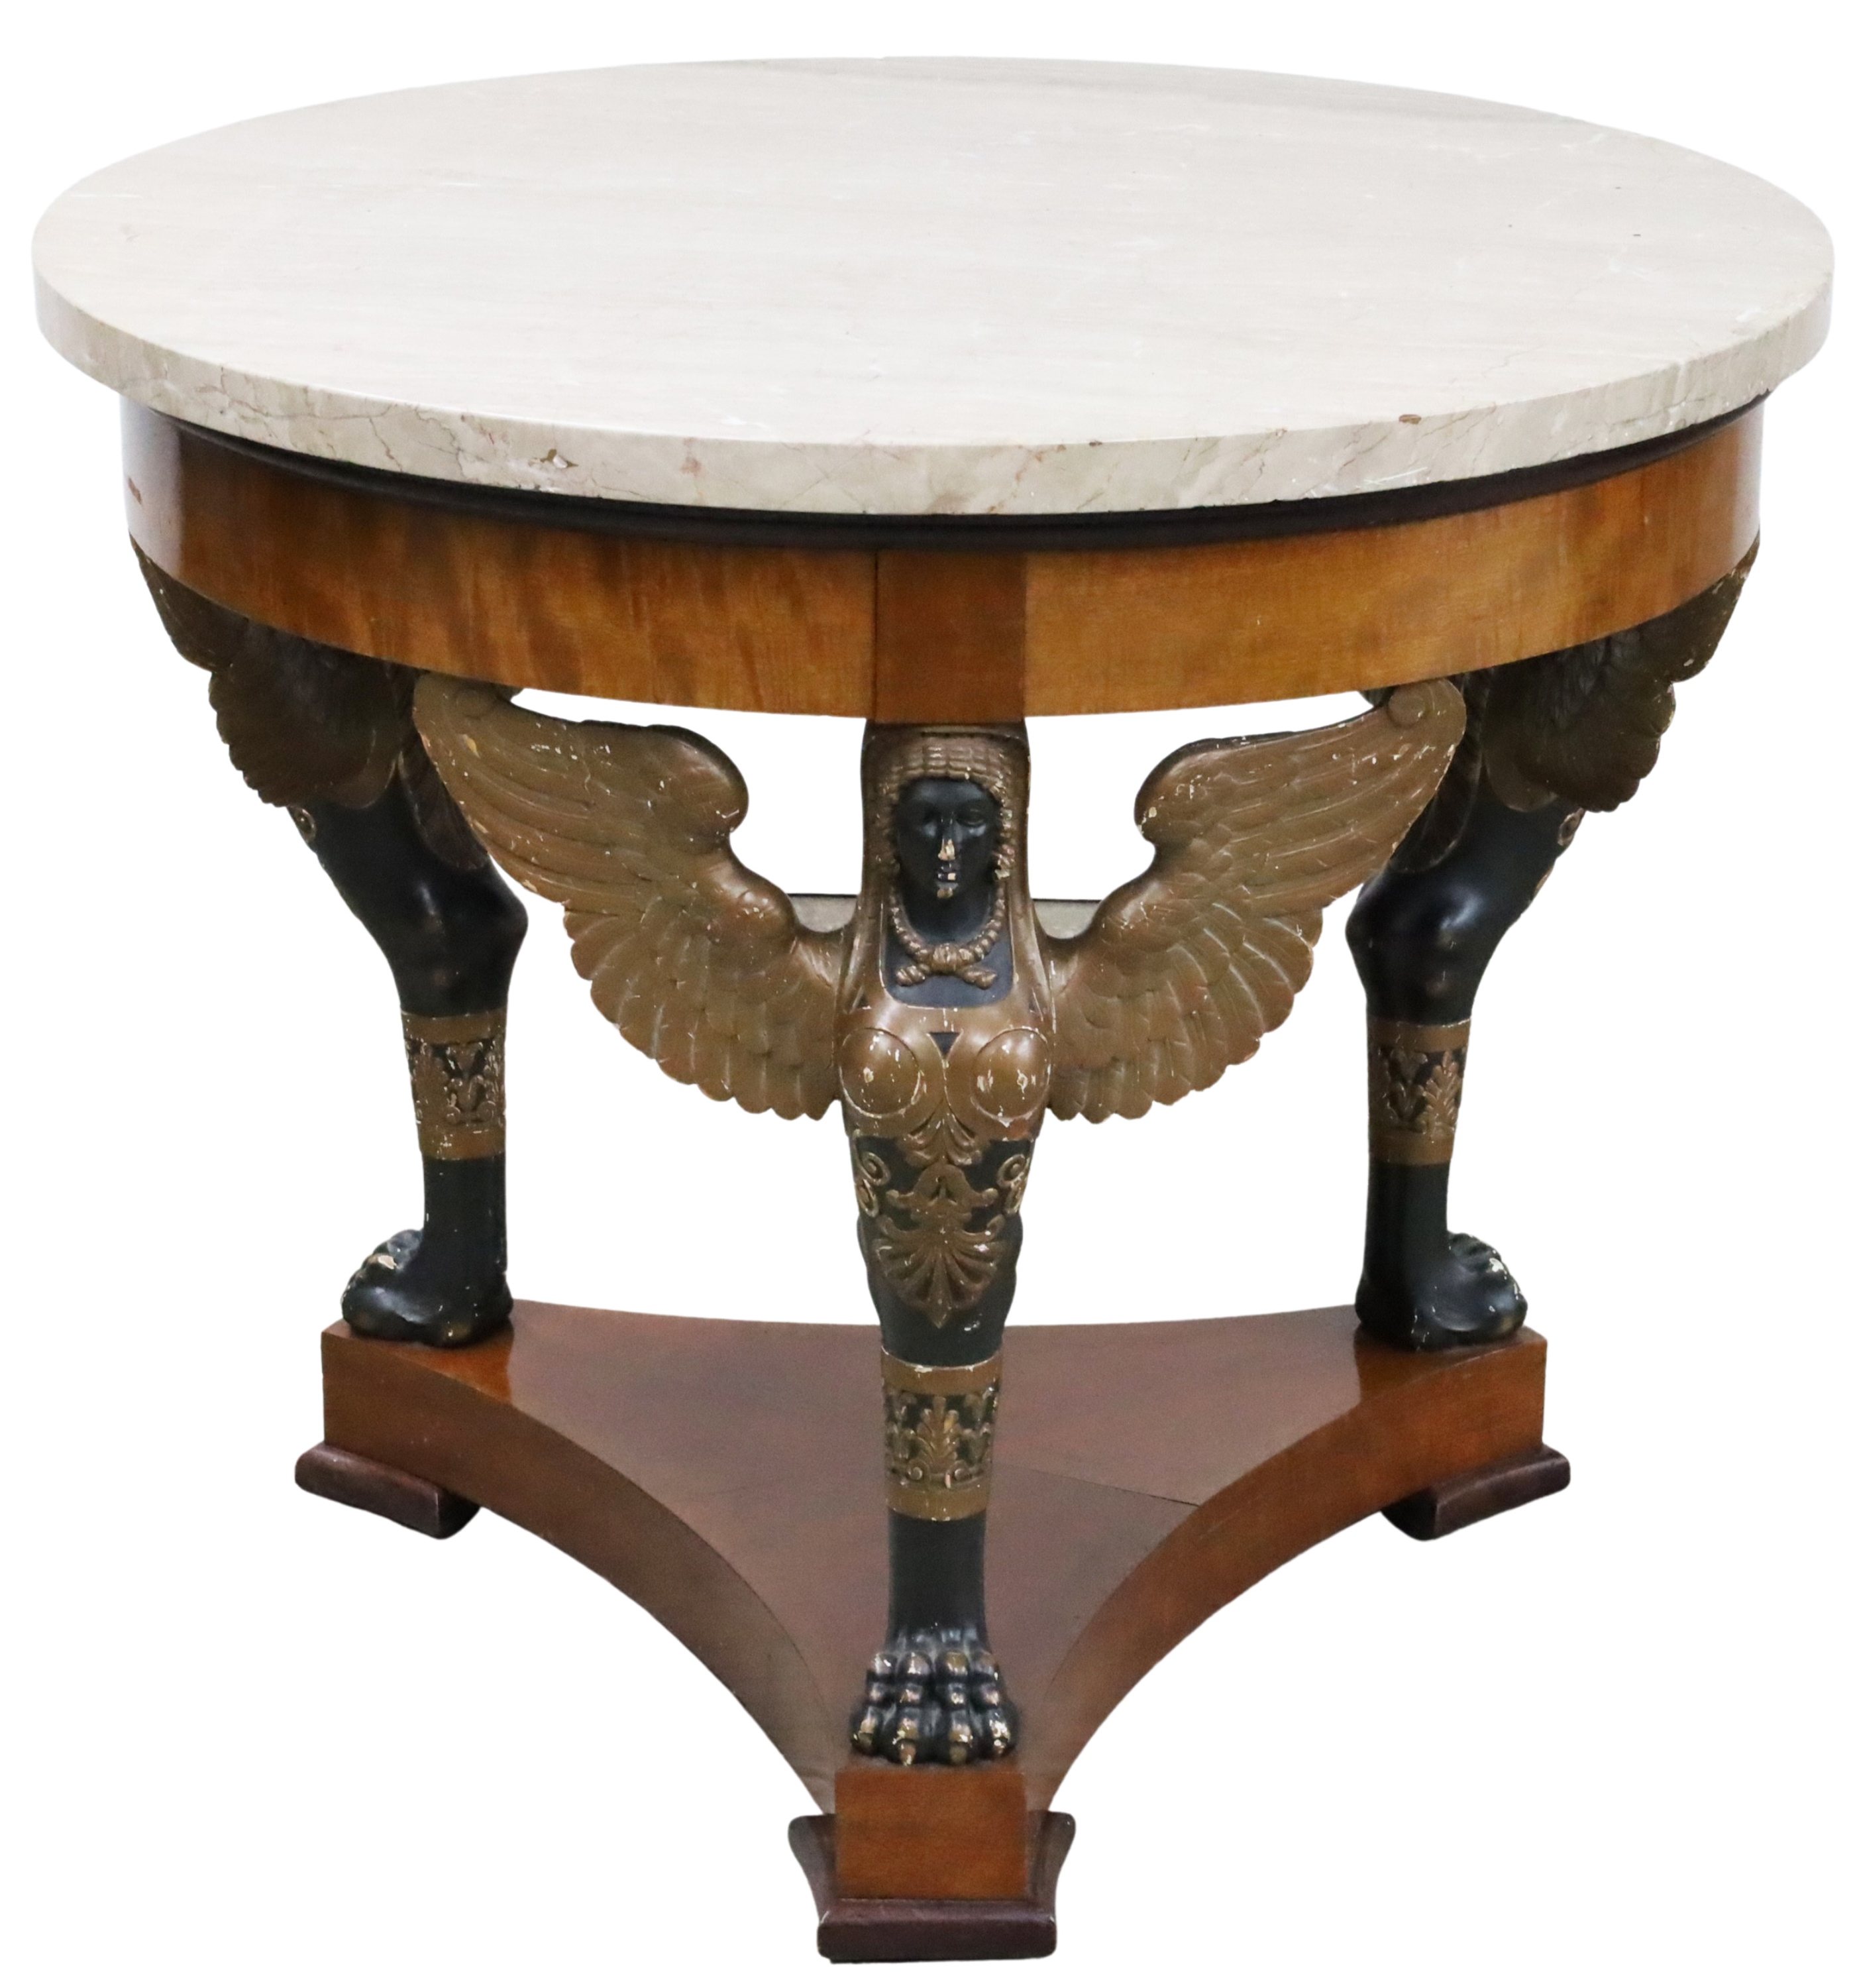 BALTIC EMPIRE STYLE MARBLE TOP